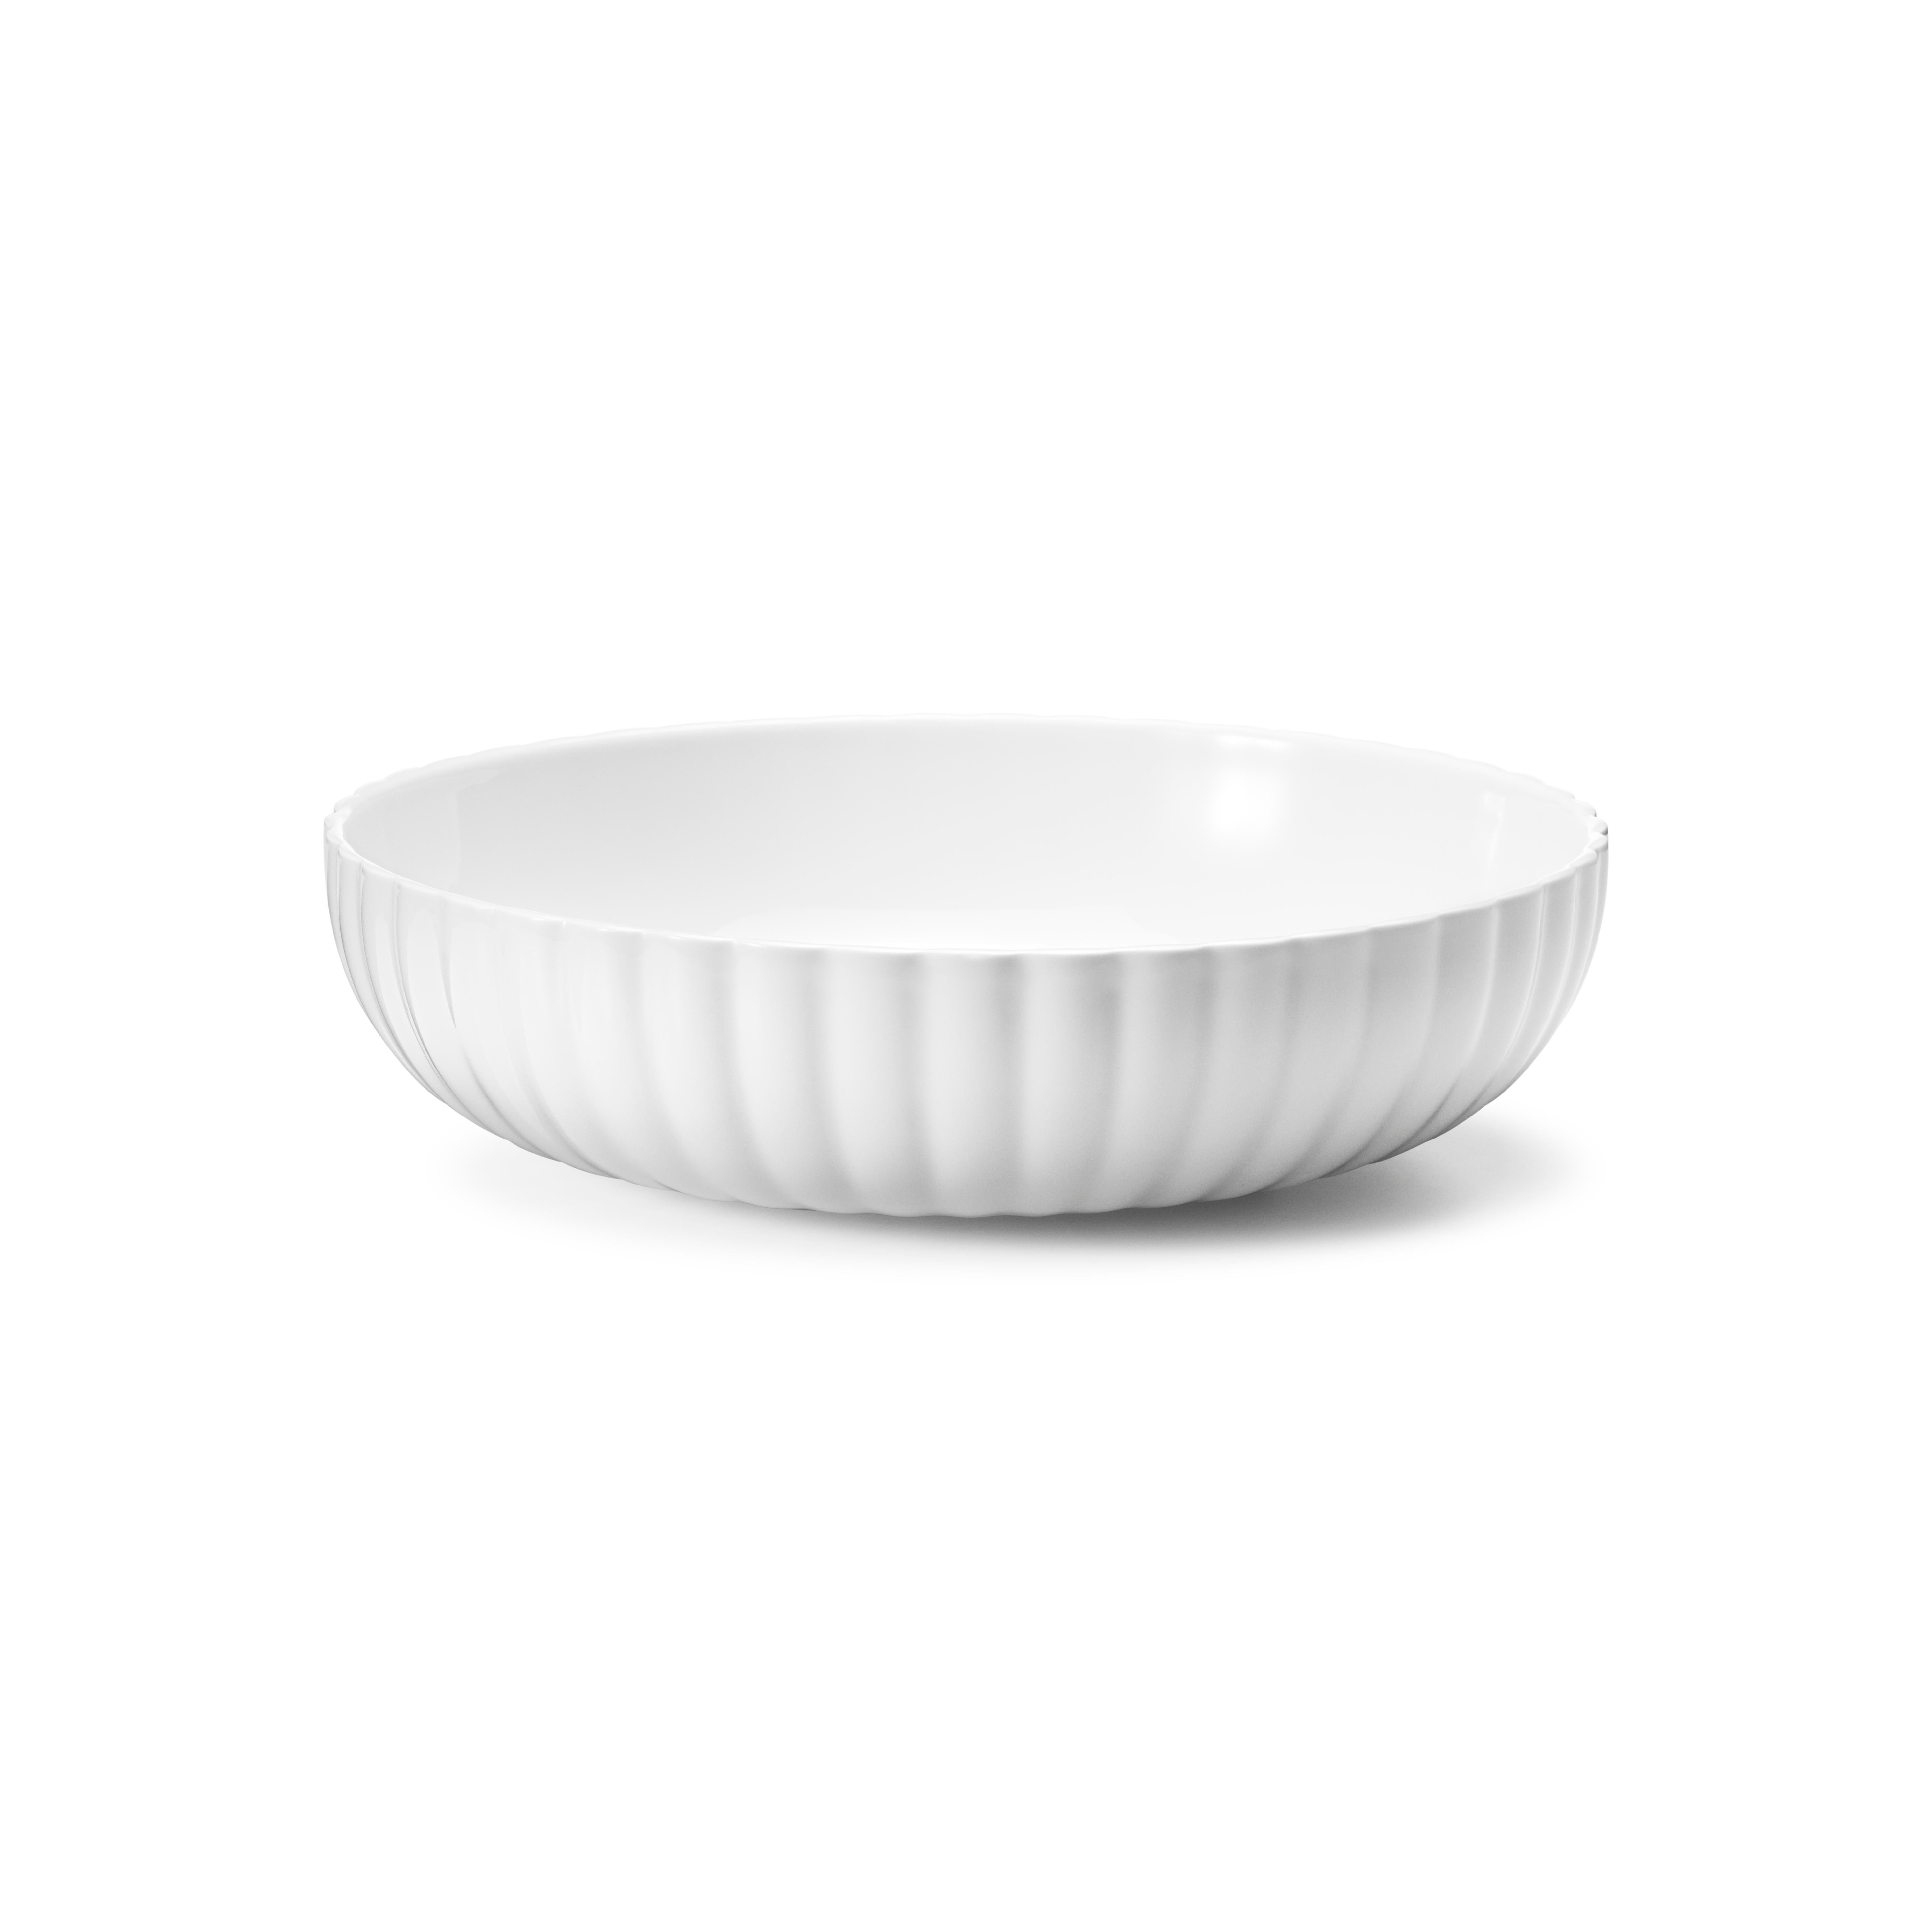 This elegant and understated porcelain bowl - decorated simply with gentle grooves that invite touch - is the perfect all-purpose dish, suitable for everything from breakfast cereal to soup or side salads. When combined with matching plates and